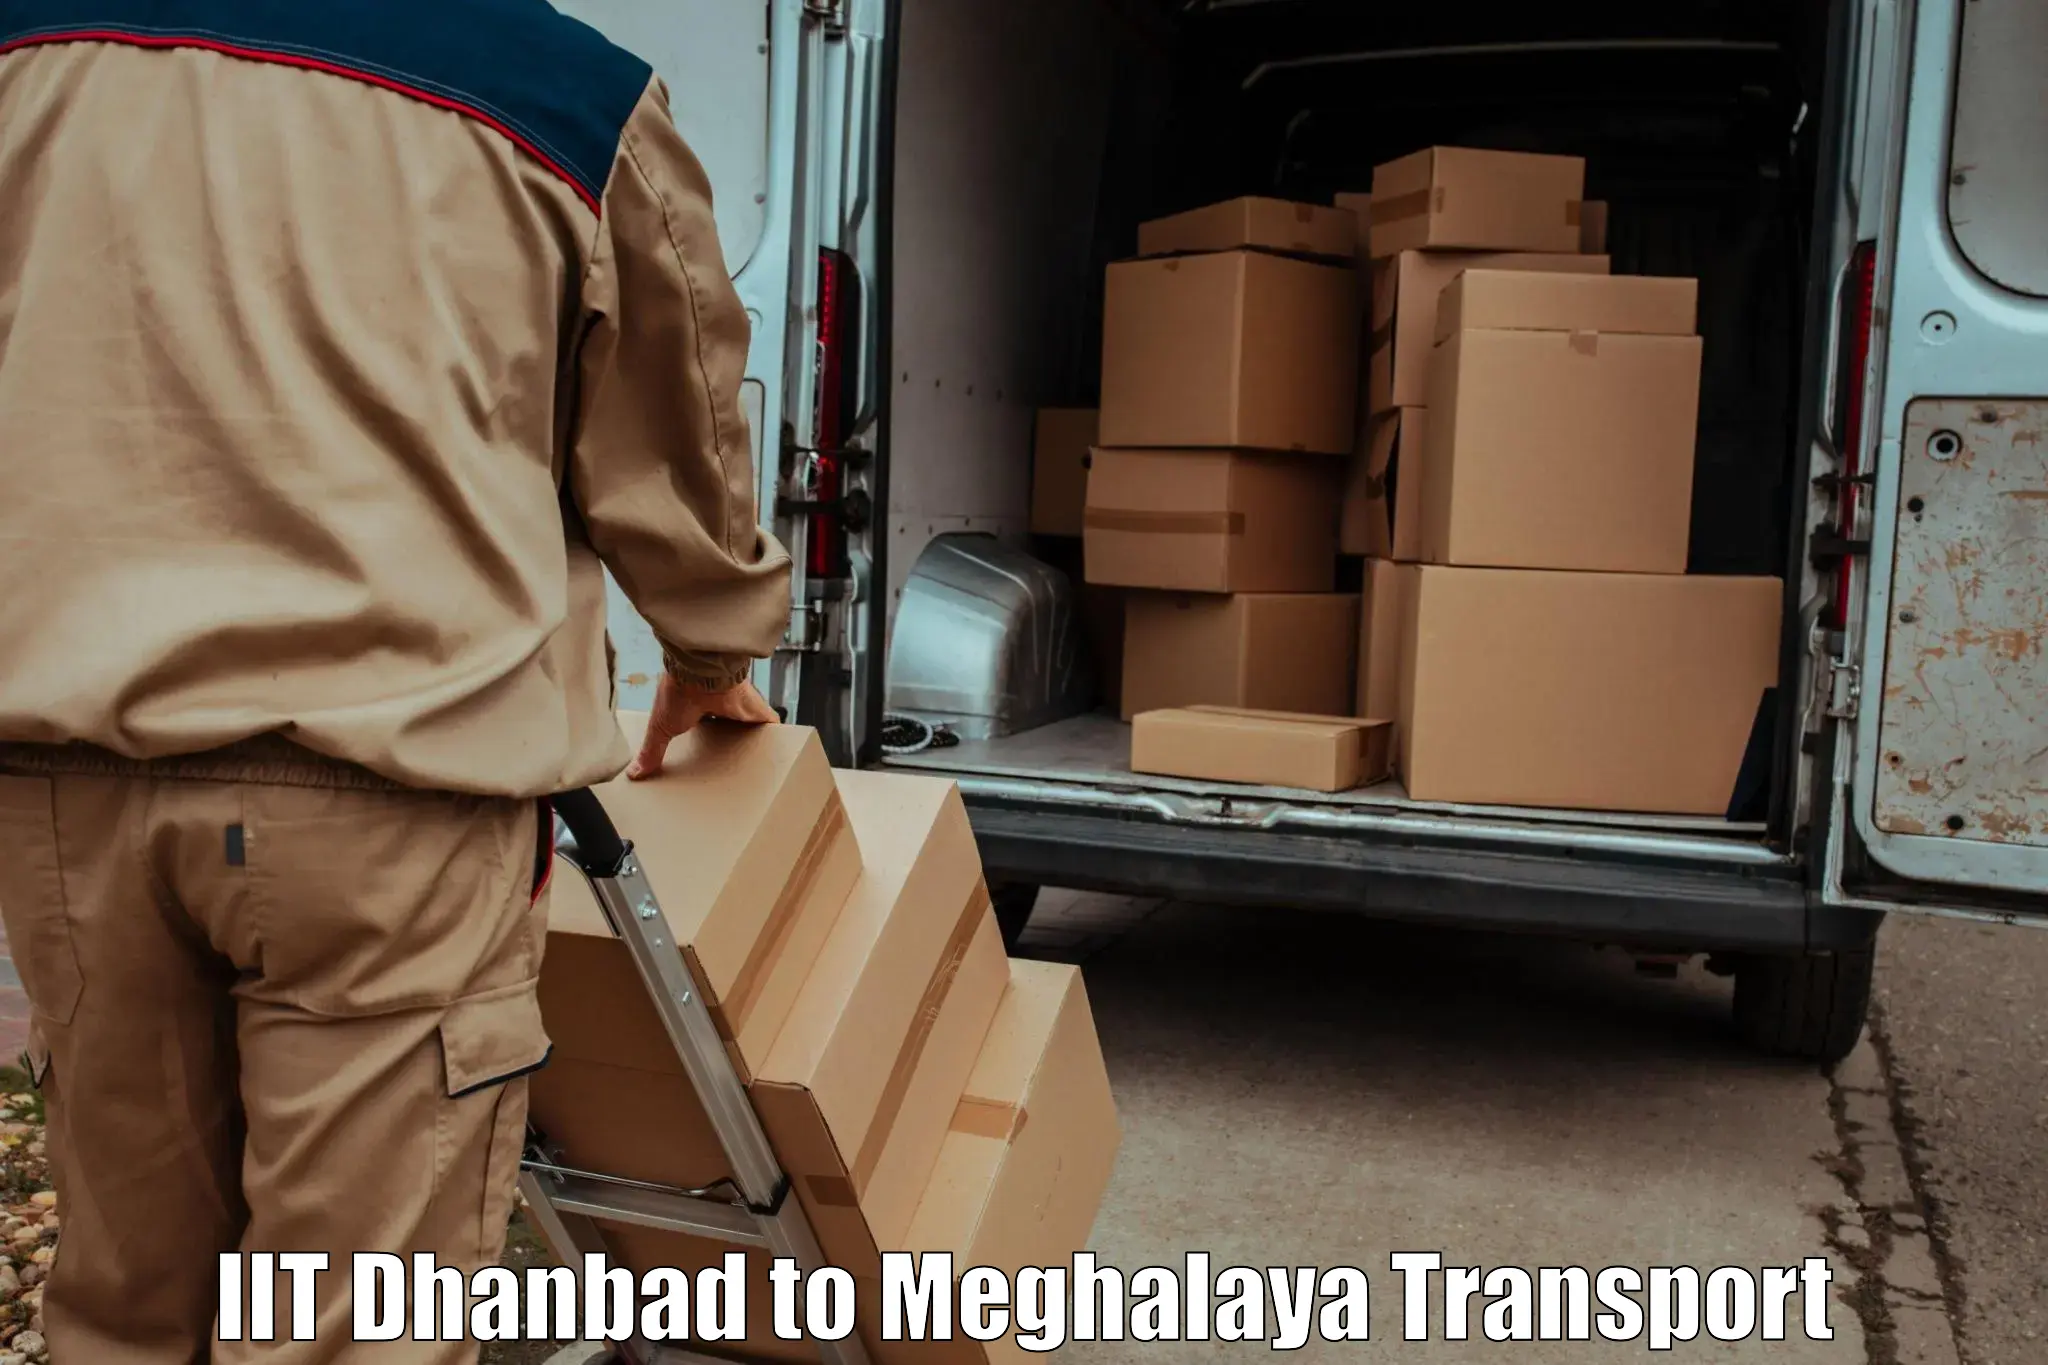 Vehicle transport services IIT Dhanbad to Shillong